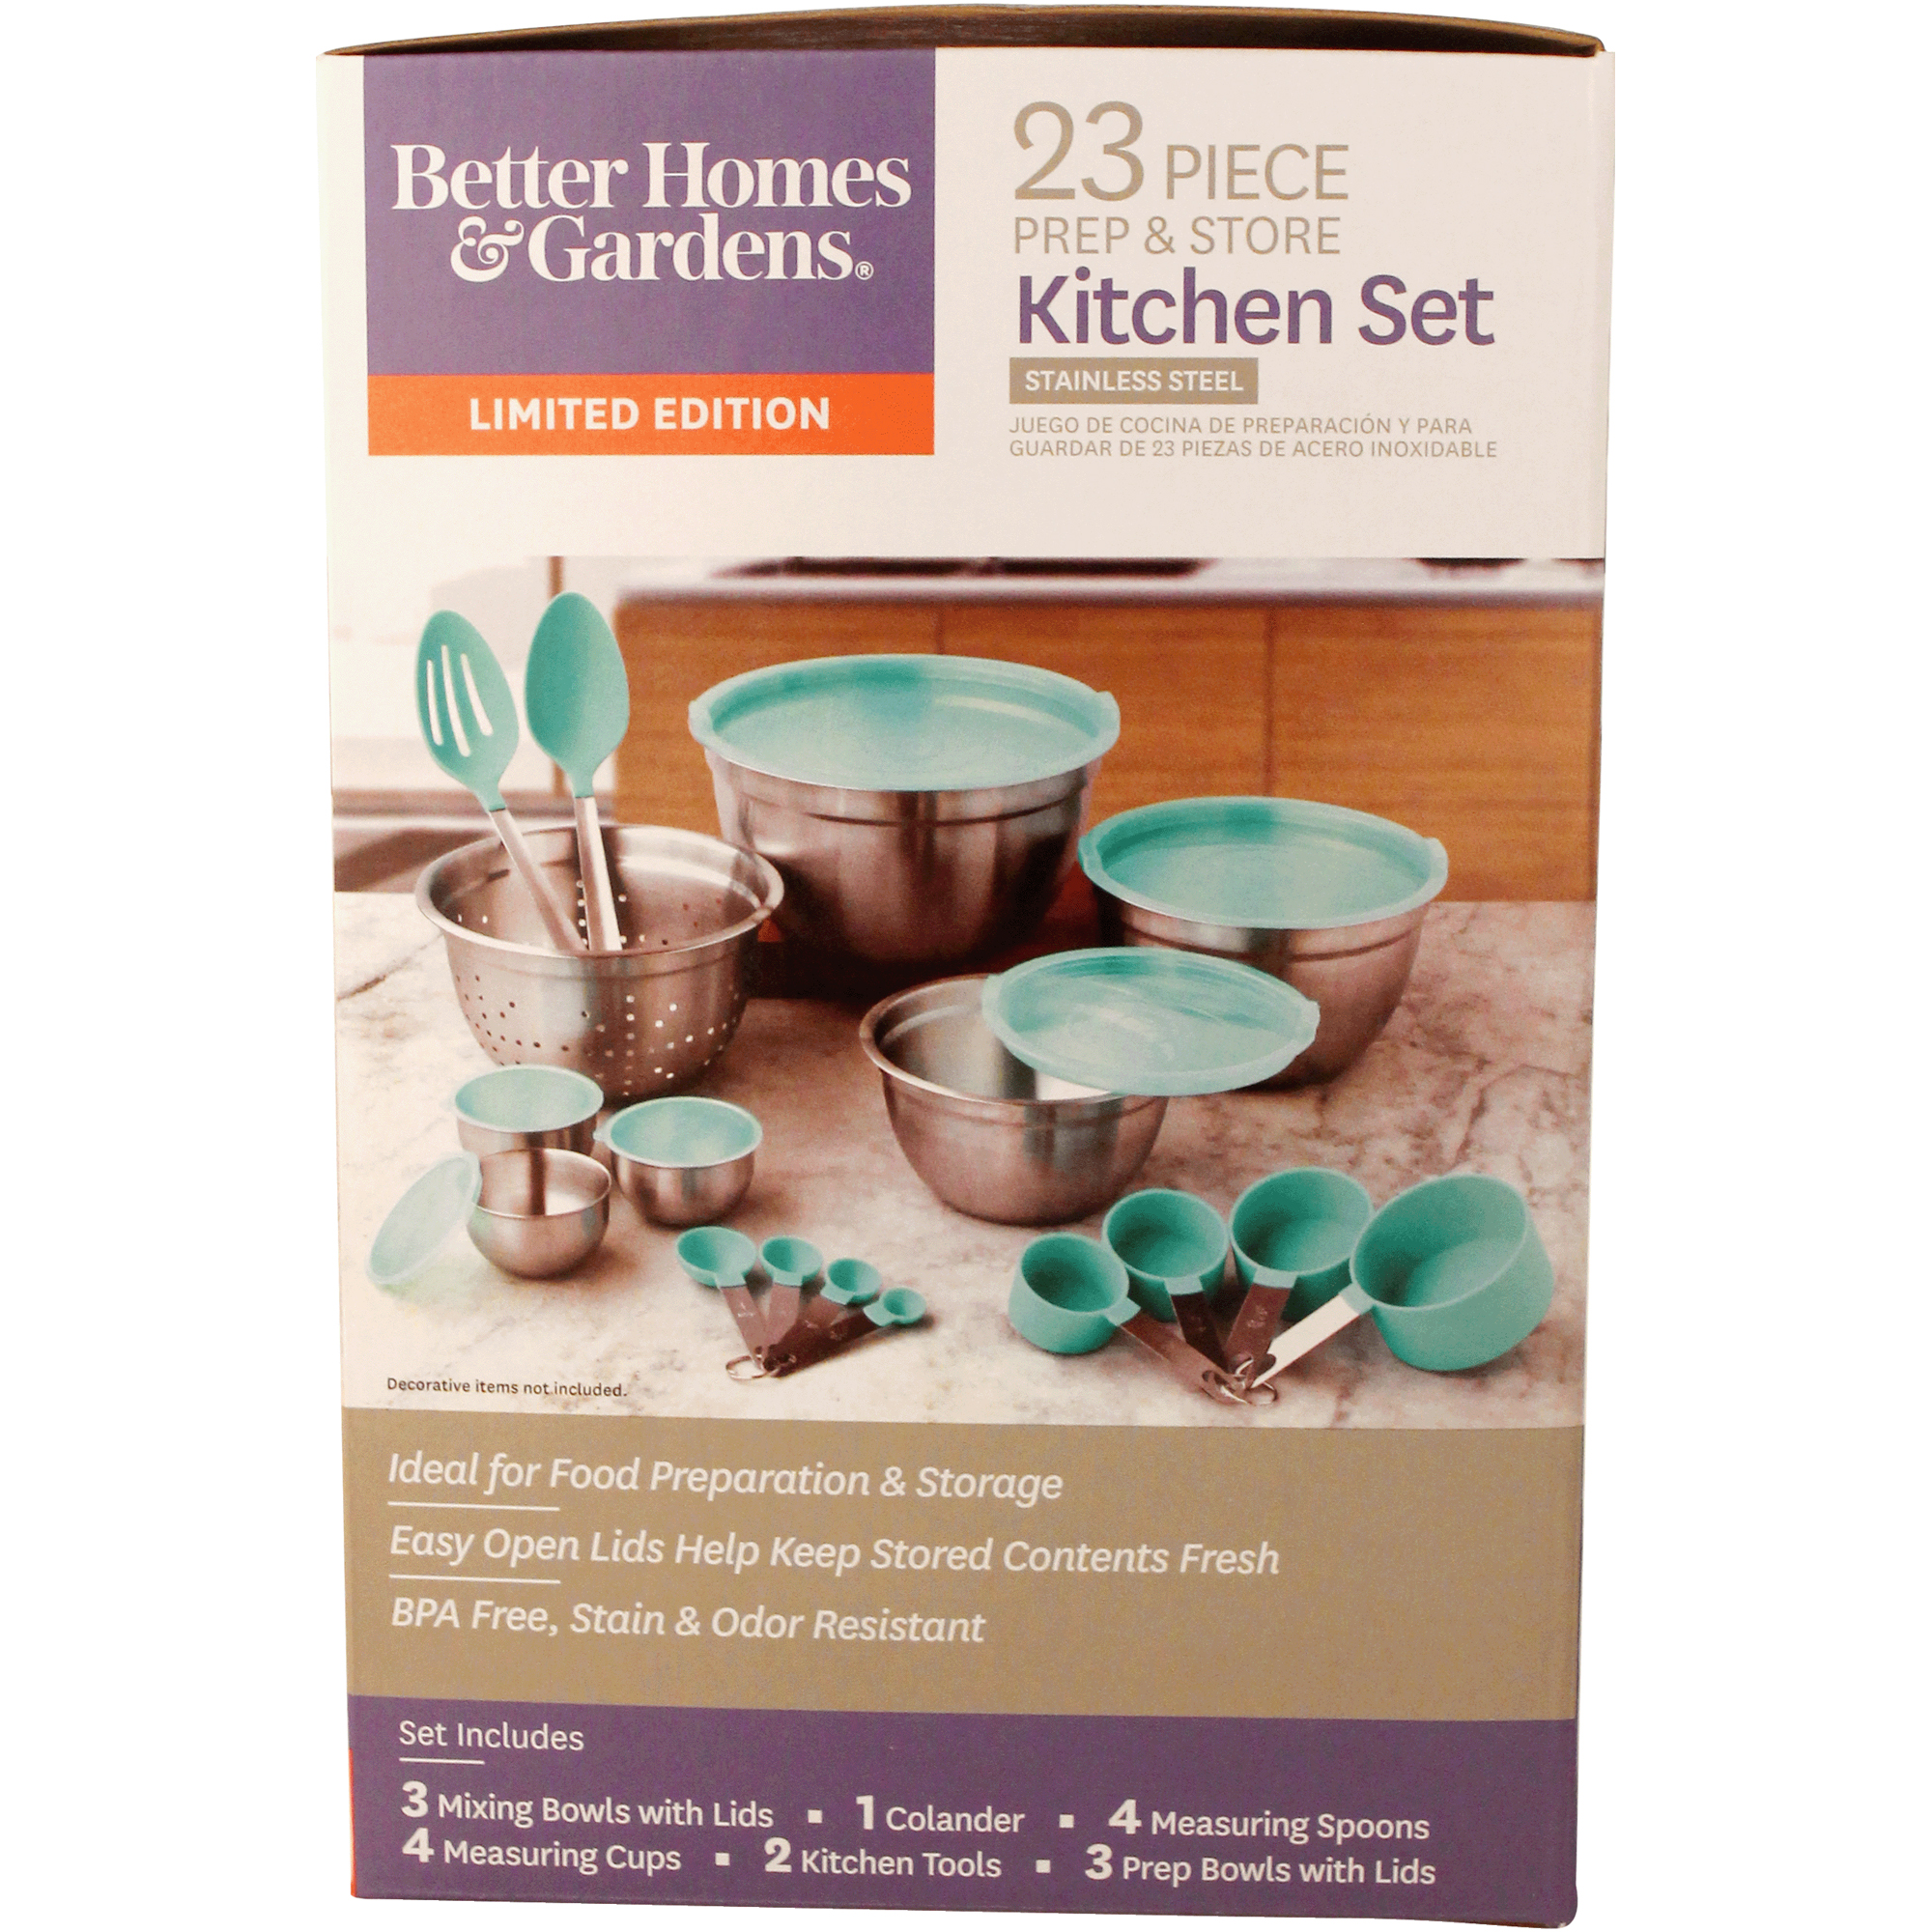 Better Homes & Gardens Teal Gadget and Utensil Set, 23 Piece - image 4 of 7